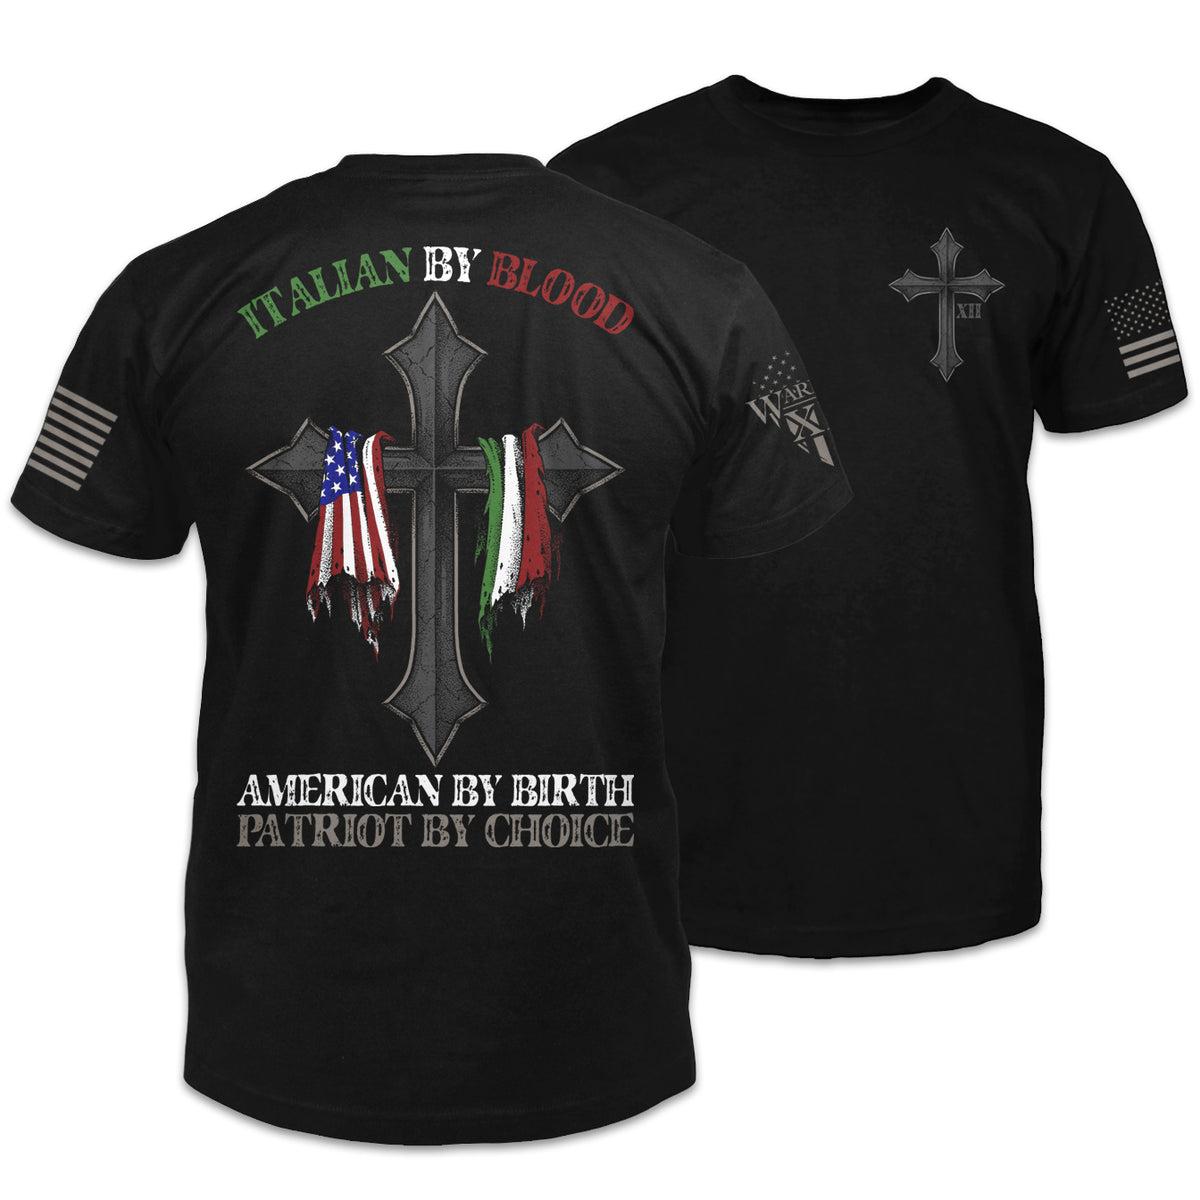 Front & back black t-shirt with the words "Italian by blood, American by birth, patriot by choice" with a cross holding the American and Italian flag printed on the shirt.